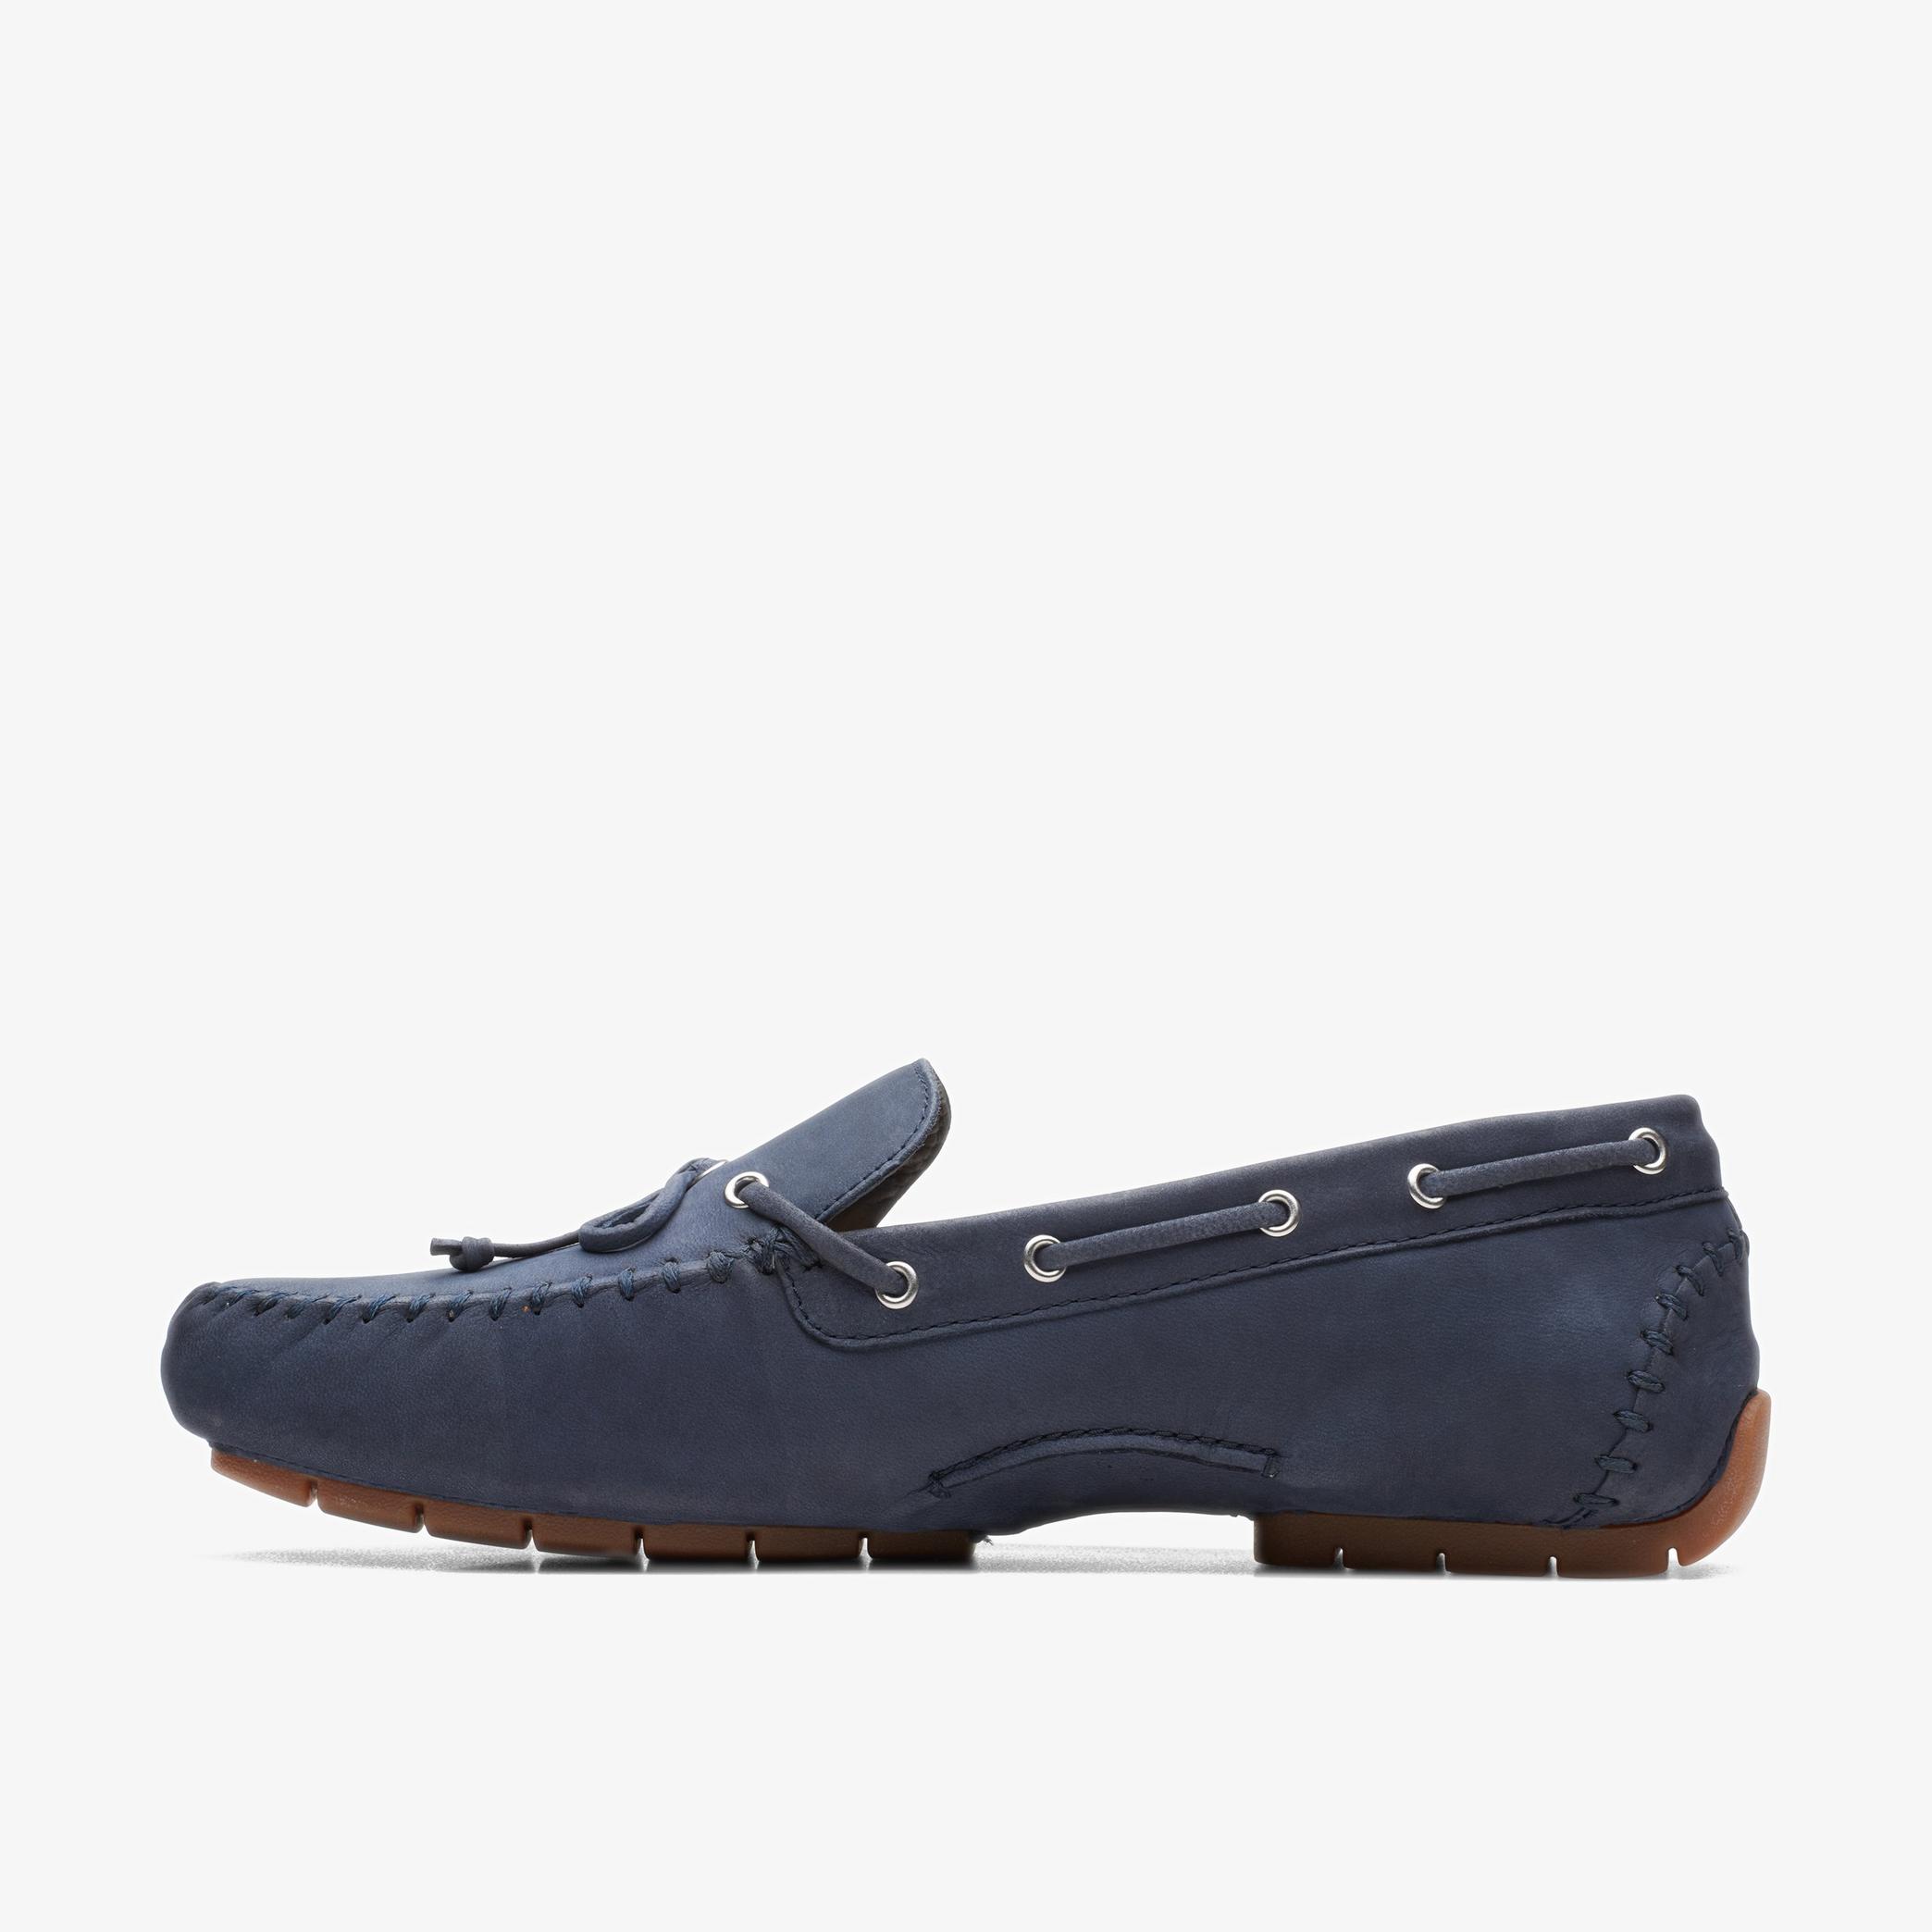 C Mocc Tie Navy Nubuck Loafers, view 2 of 6